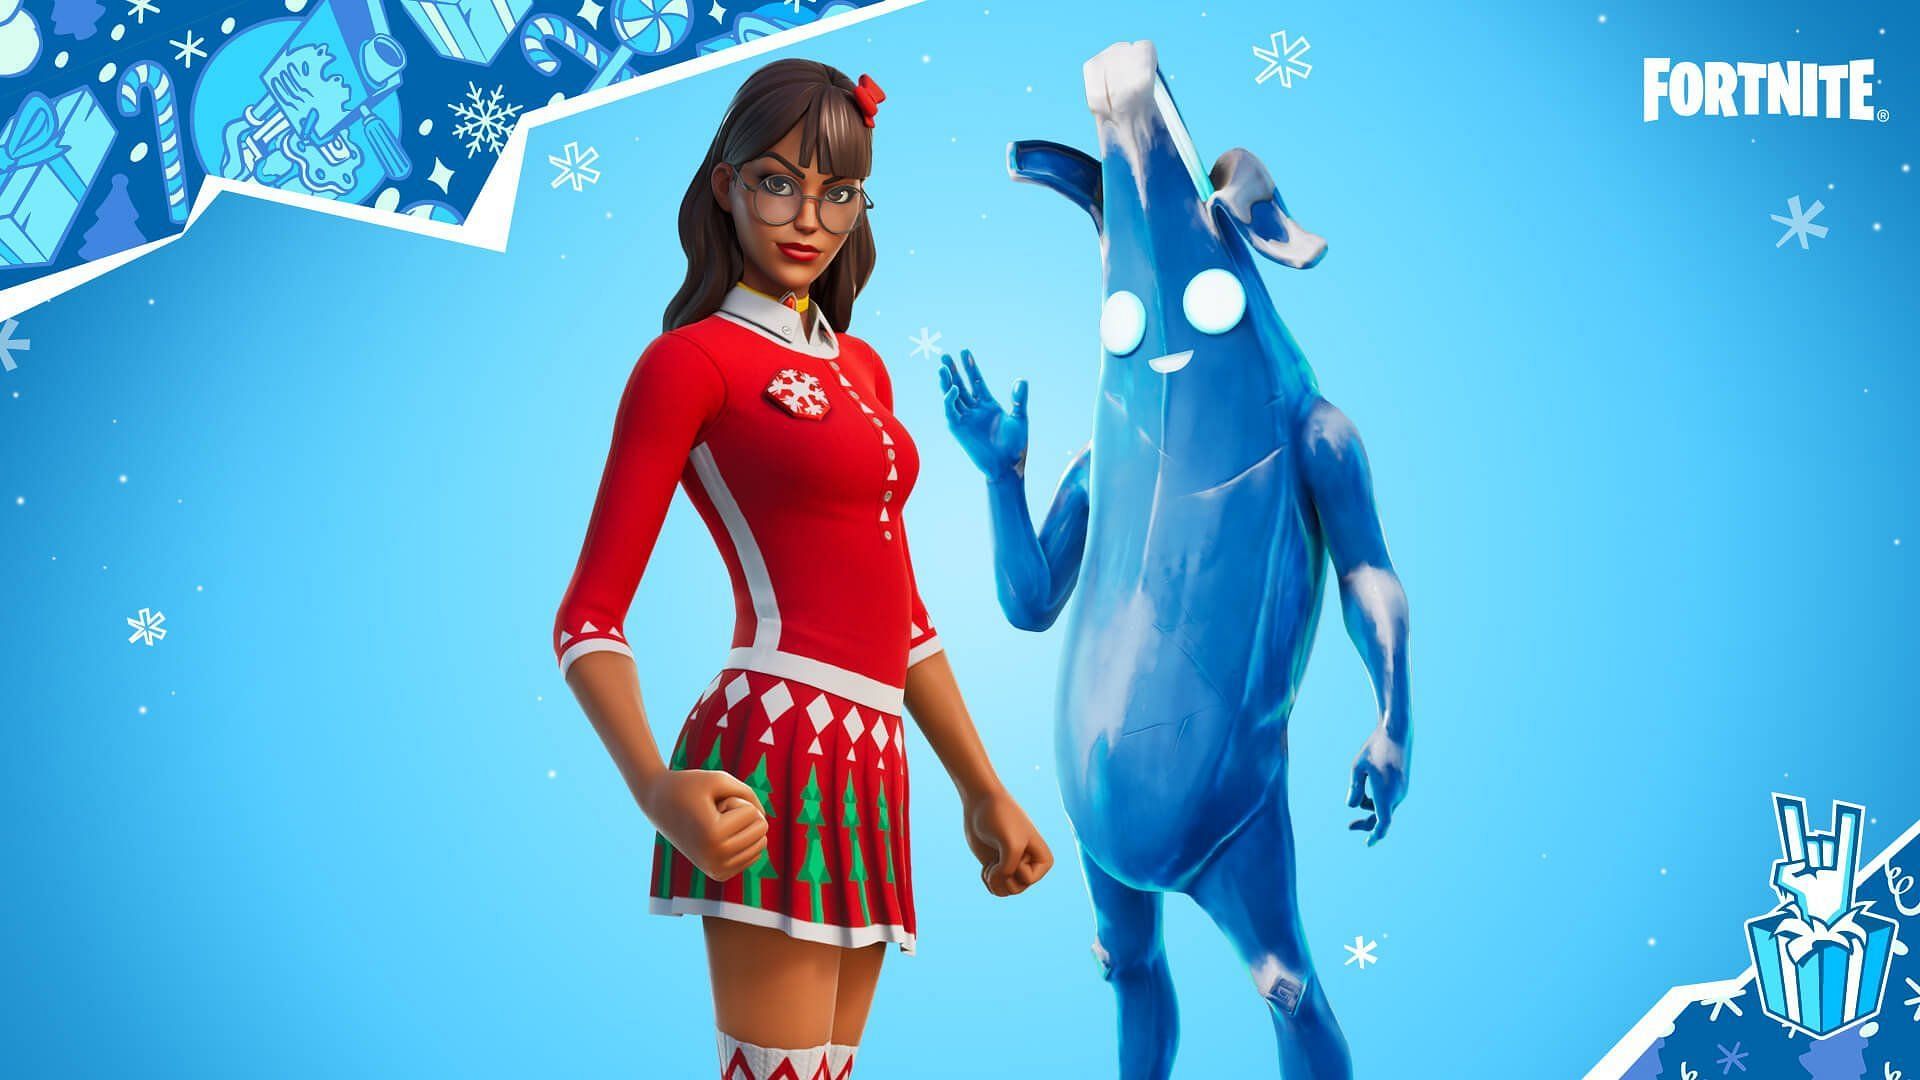 Krissabelle skin can be obtained through the free gifts section in Fortnite Chapter 3 Season 1 (Image via Necromancer/Twitter)